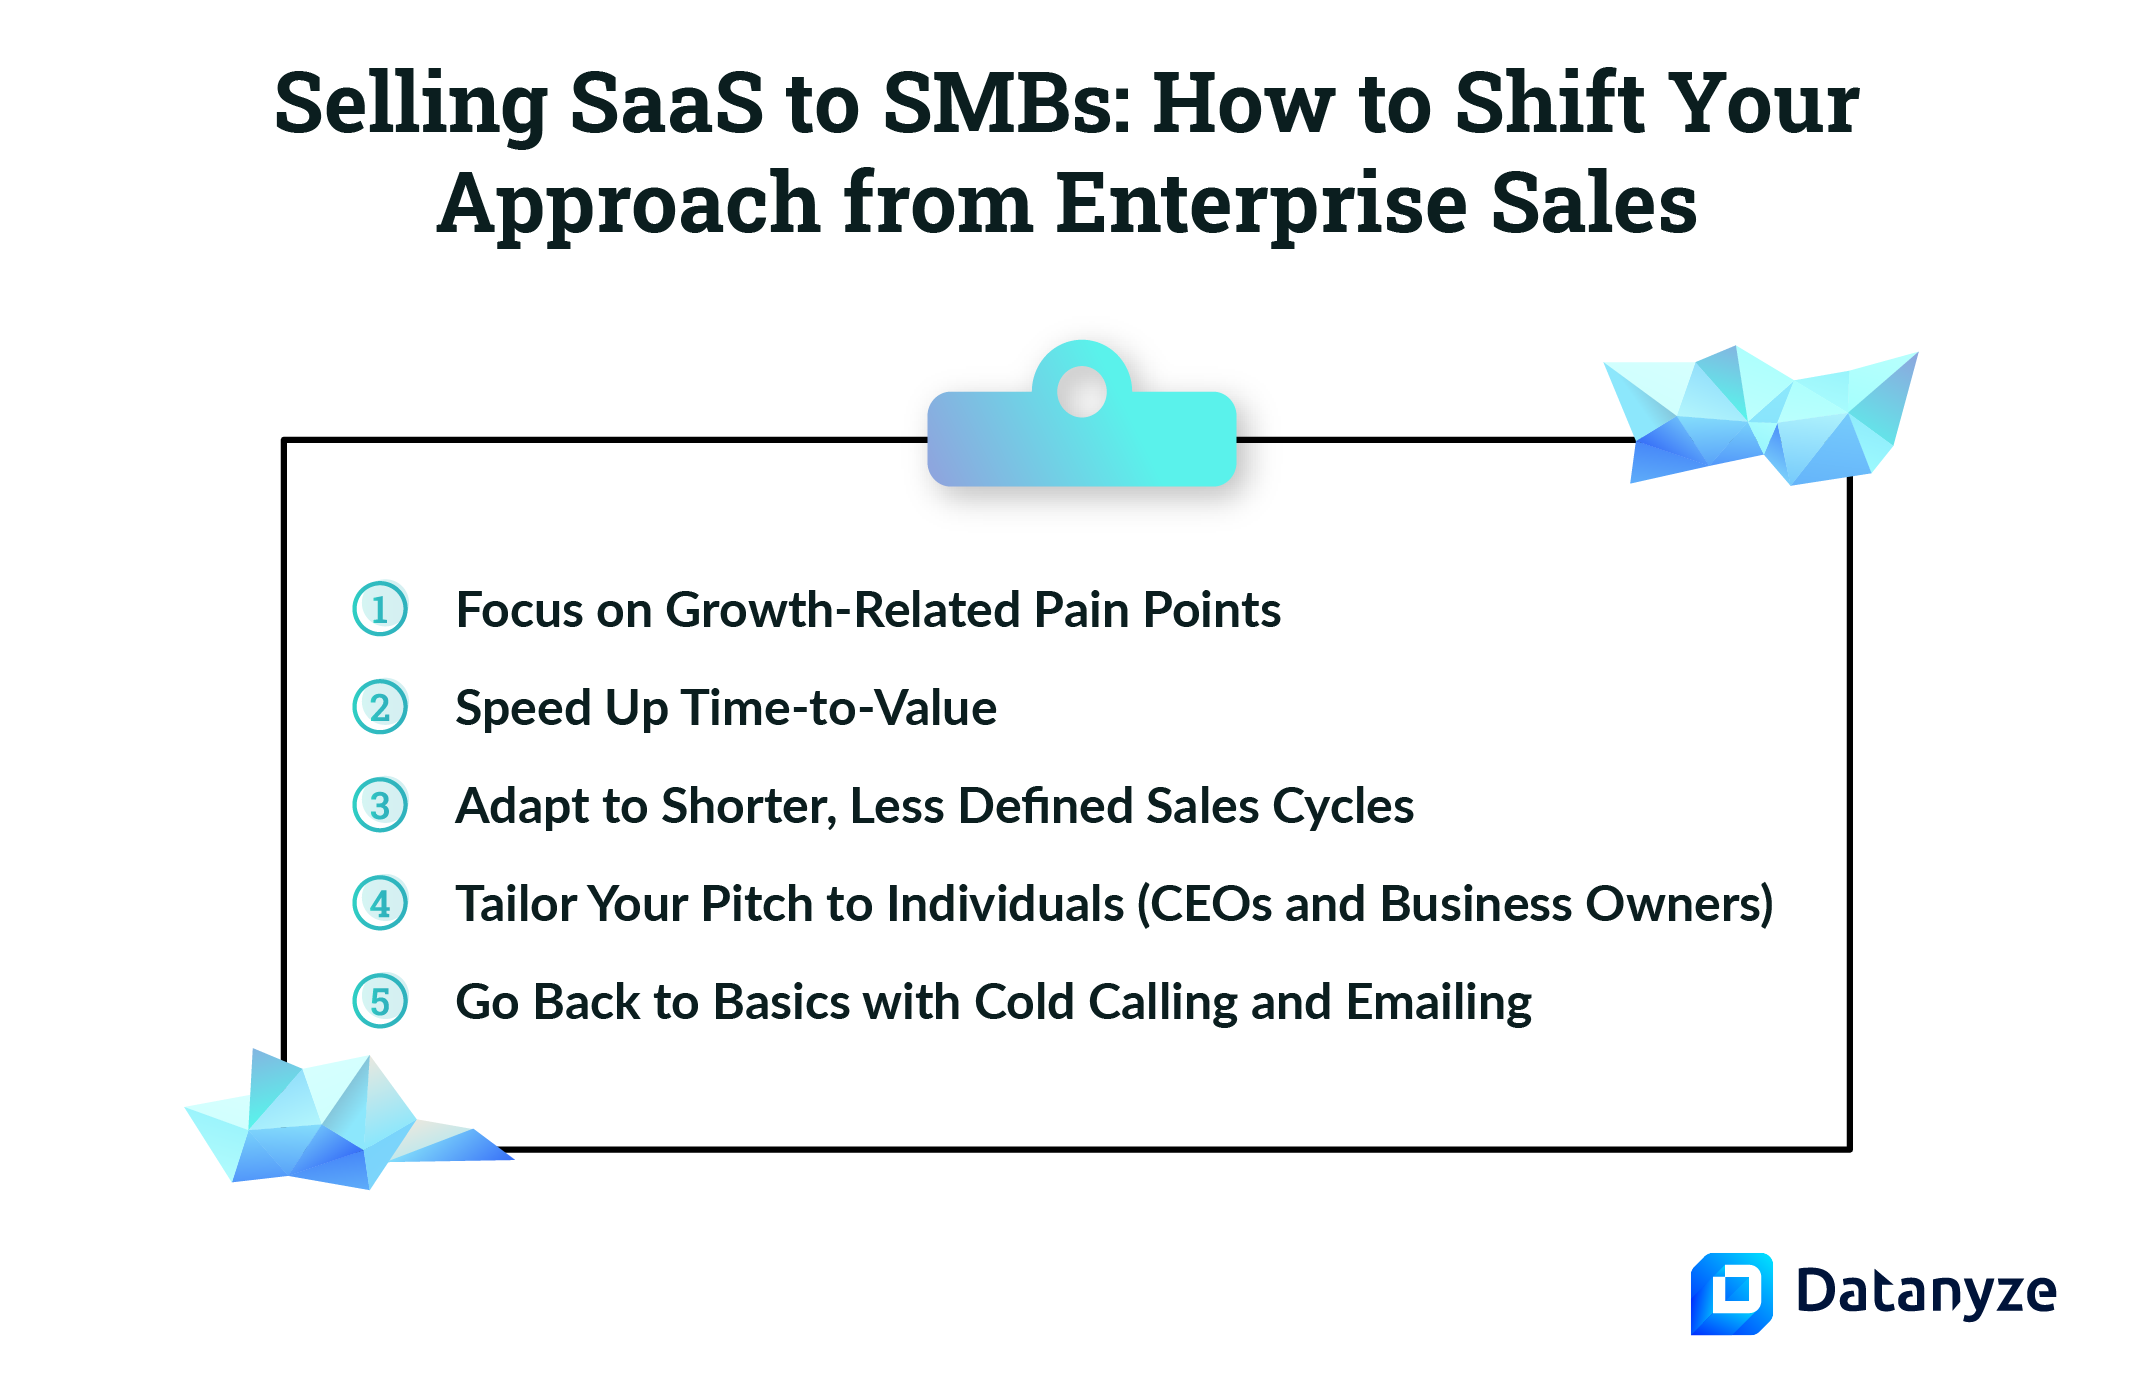 How to Sell SaaS to SMBs: What You Should Do Differently from Enterprise Sales